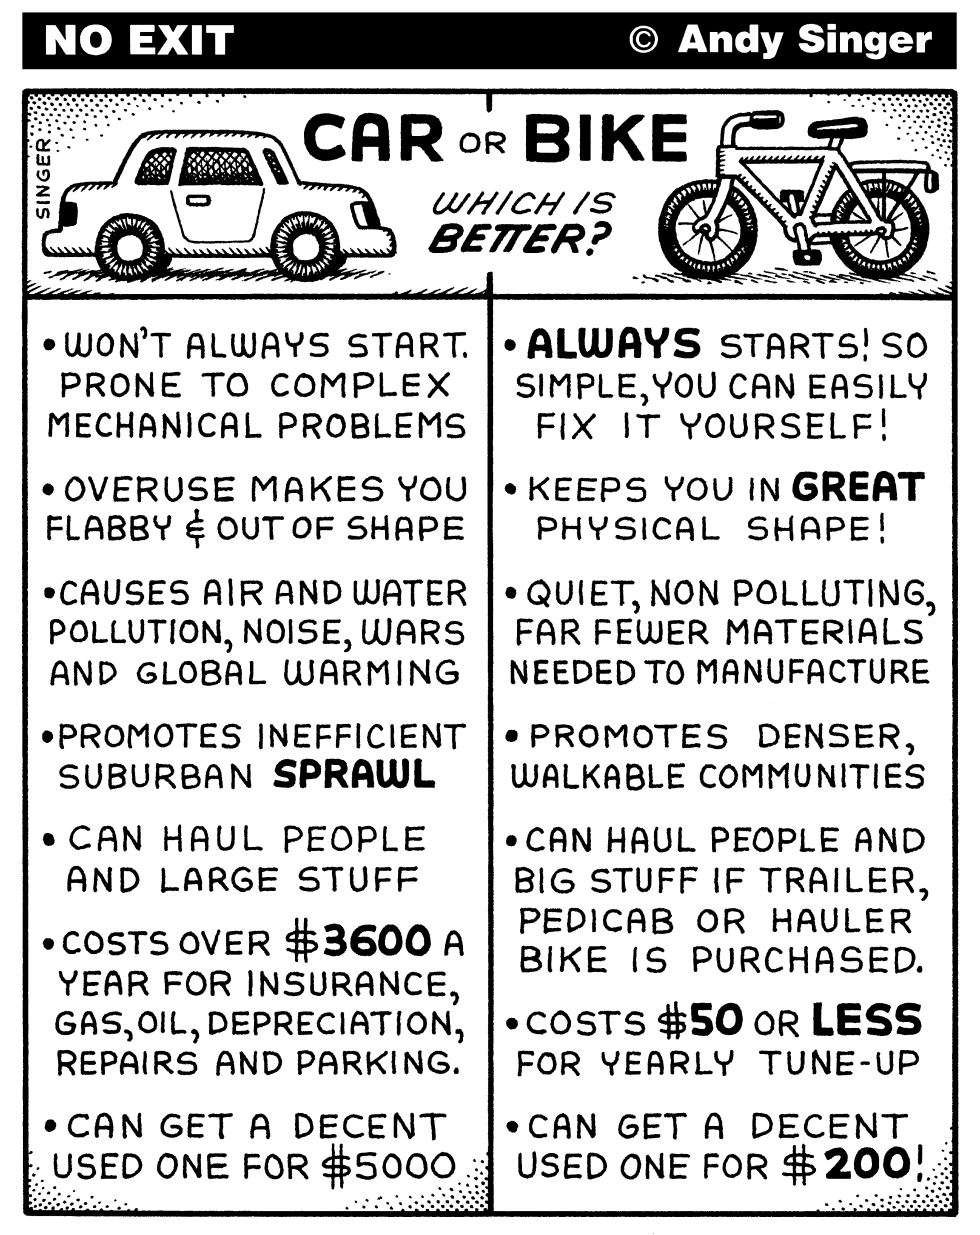 CAR AND BICYCLE COMPARISON by Andy Singer